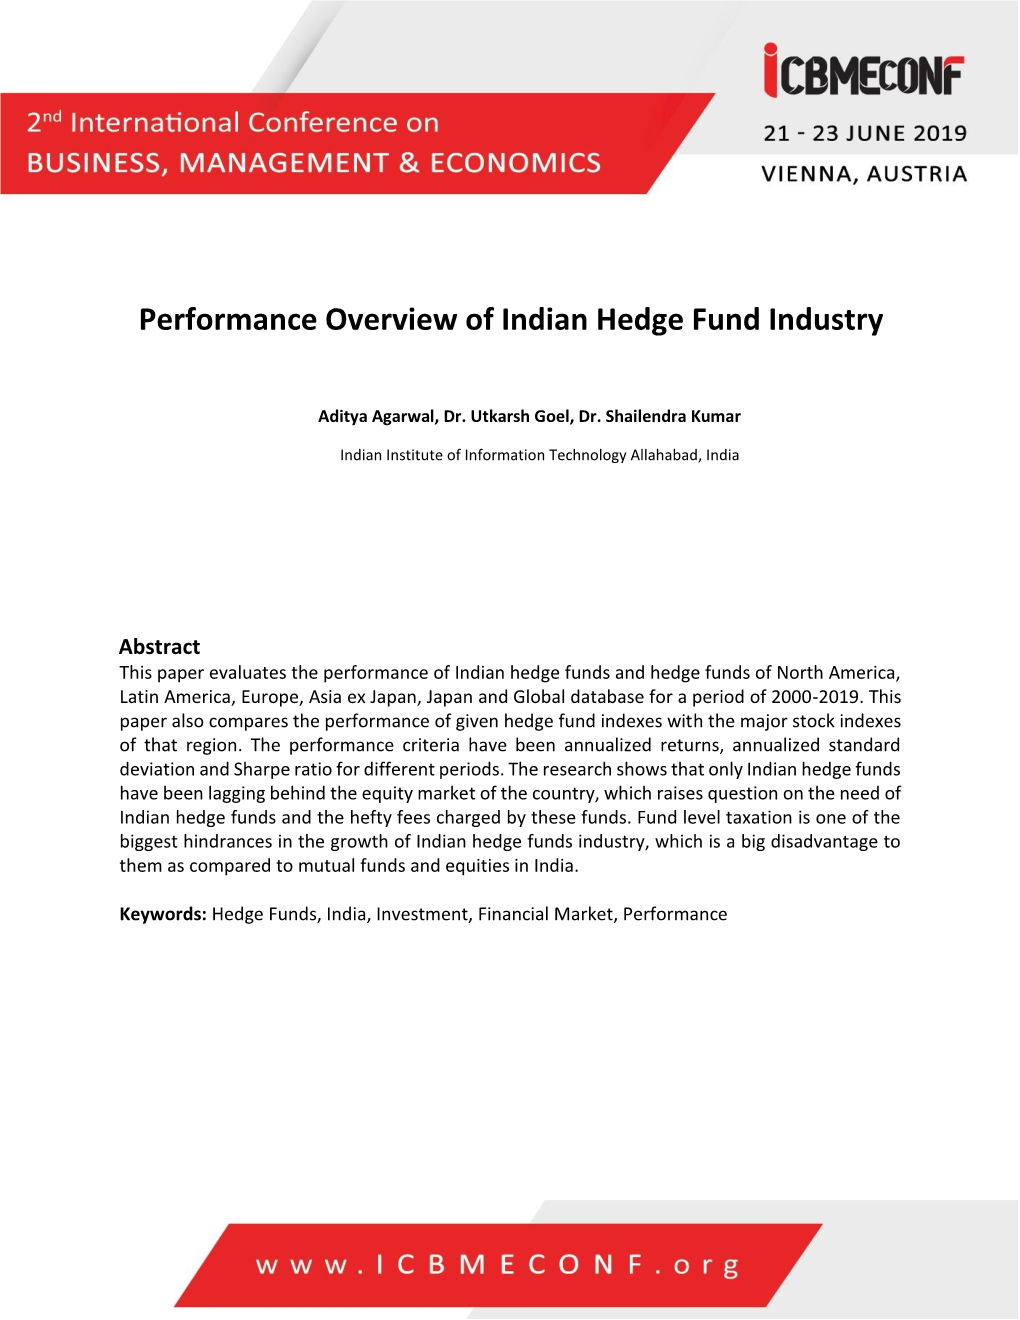 Performance Overview of Indian Hedge Fund Industry